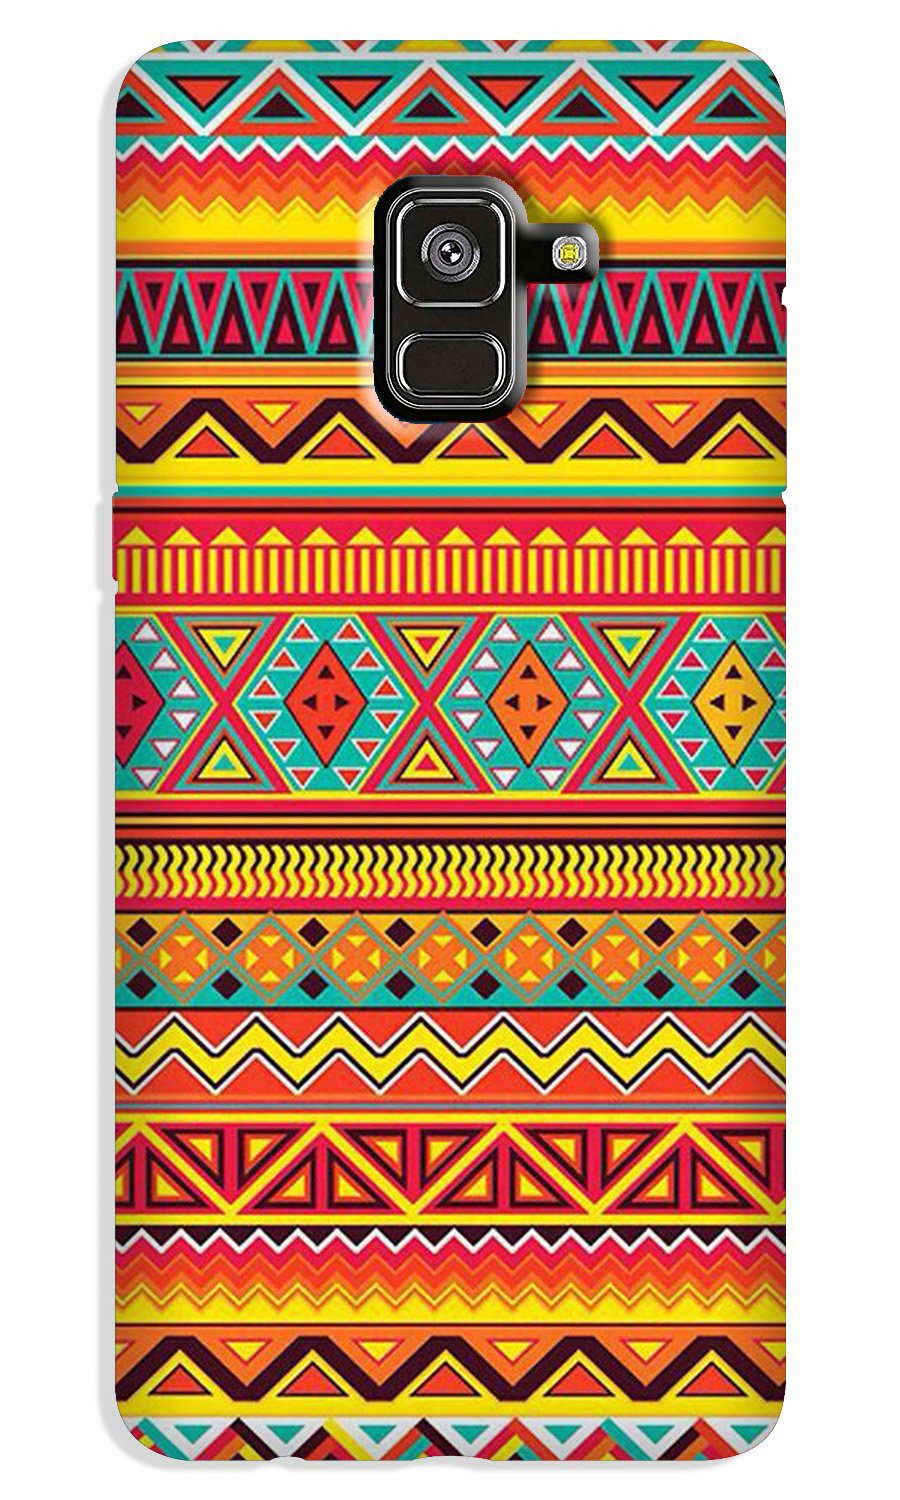 Zigzag line pattern Case for Galaxy J6 / On6